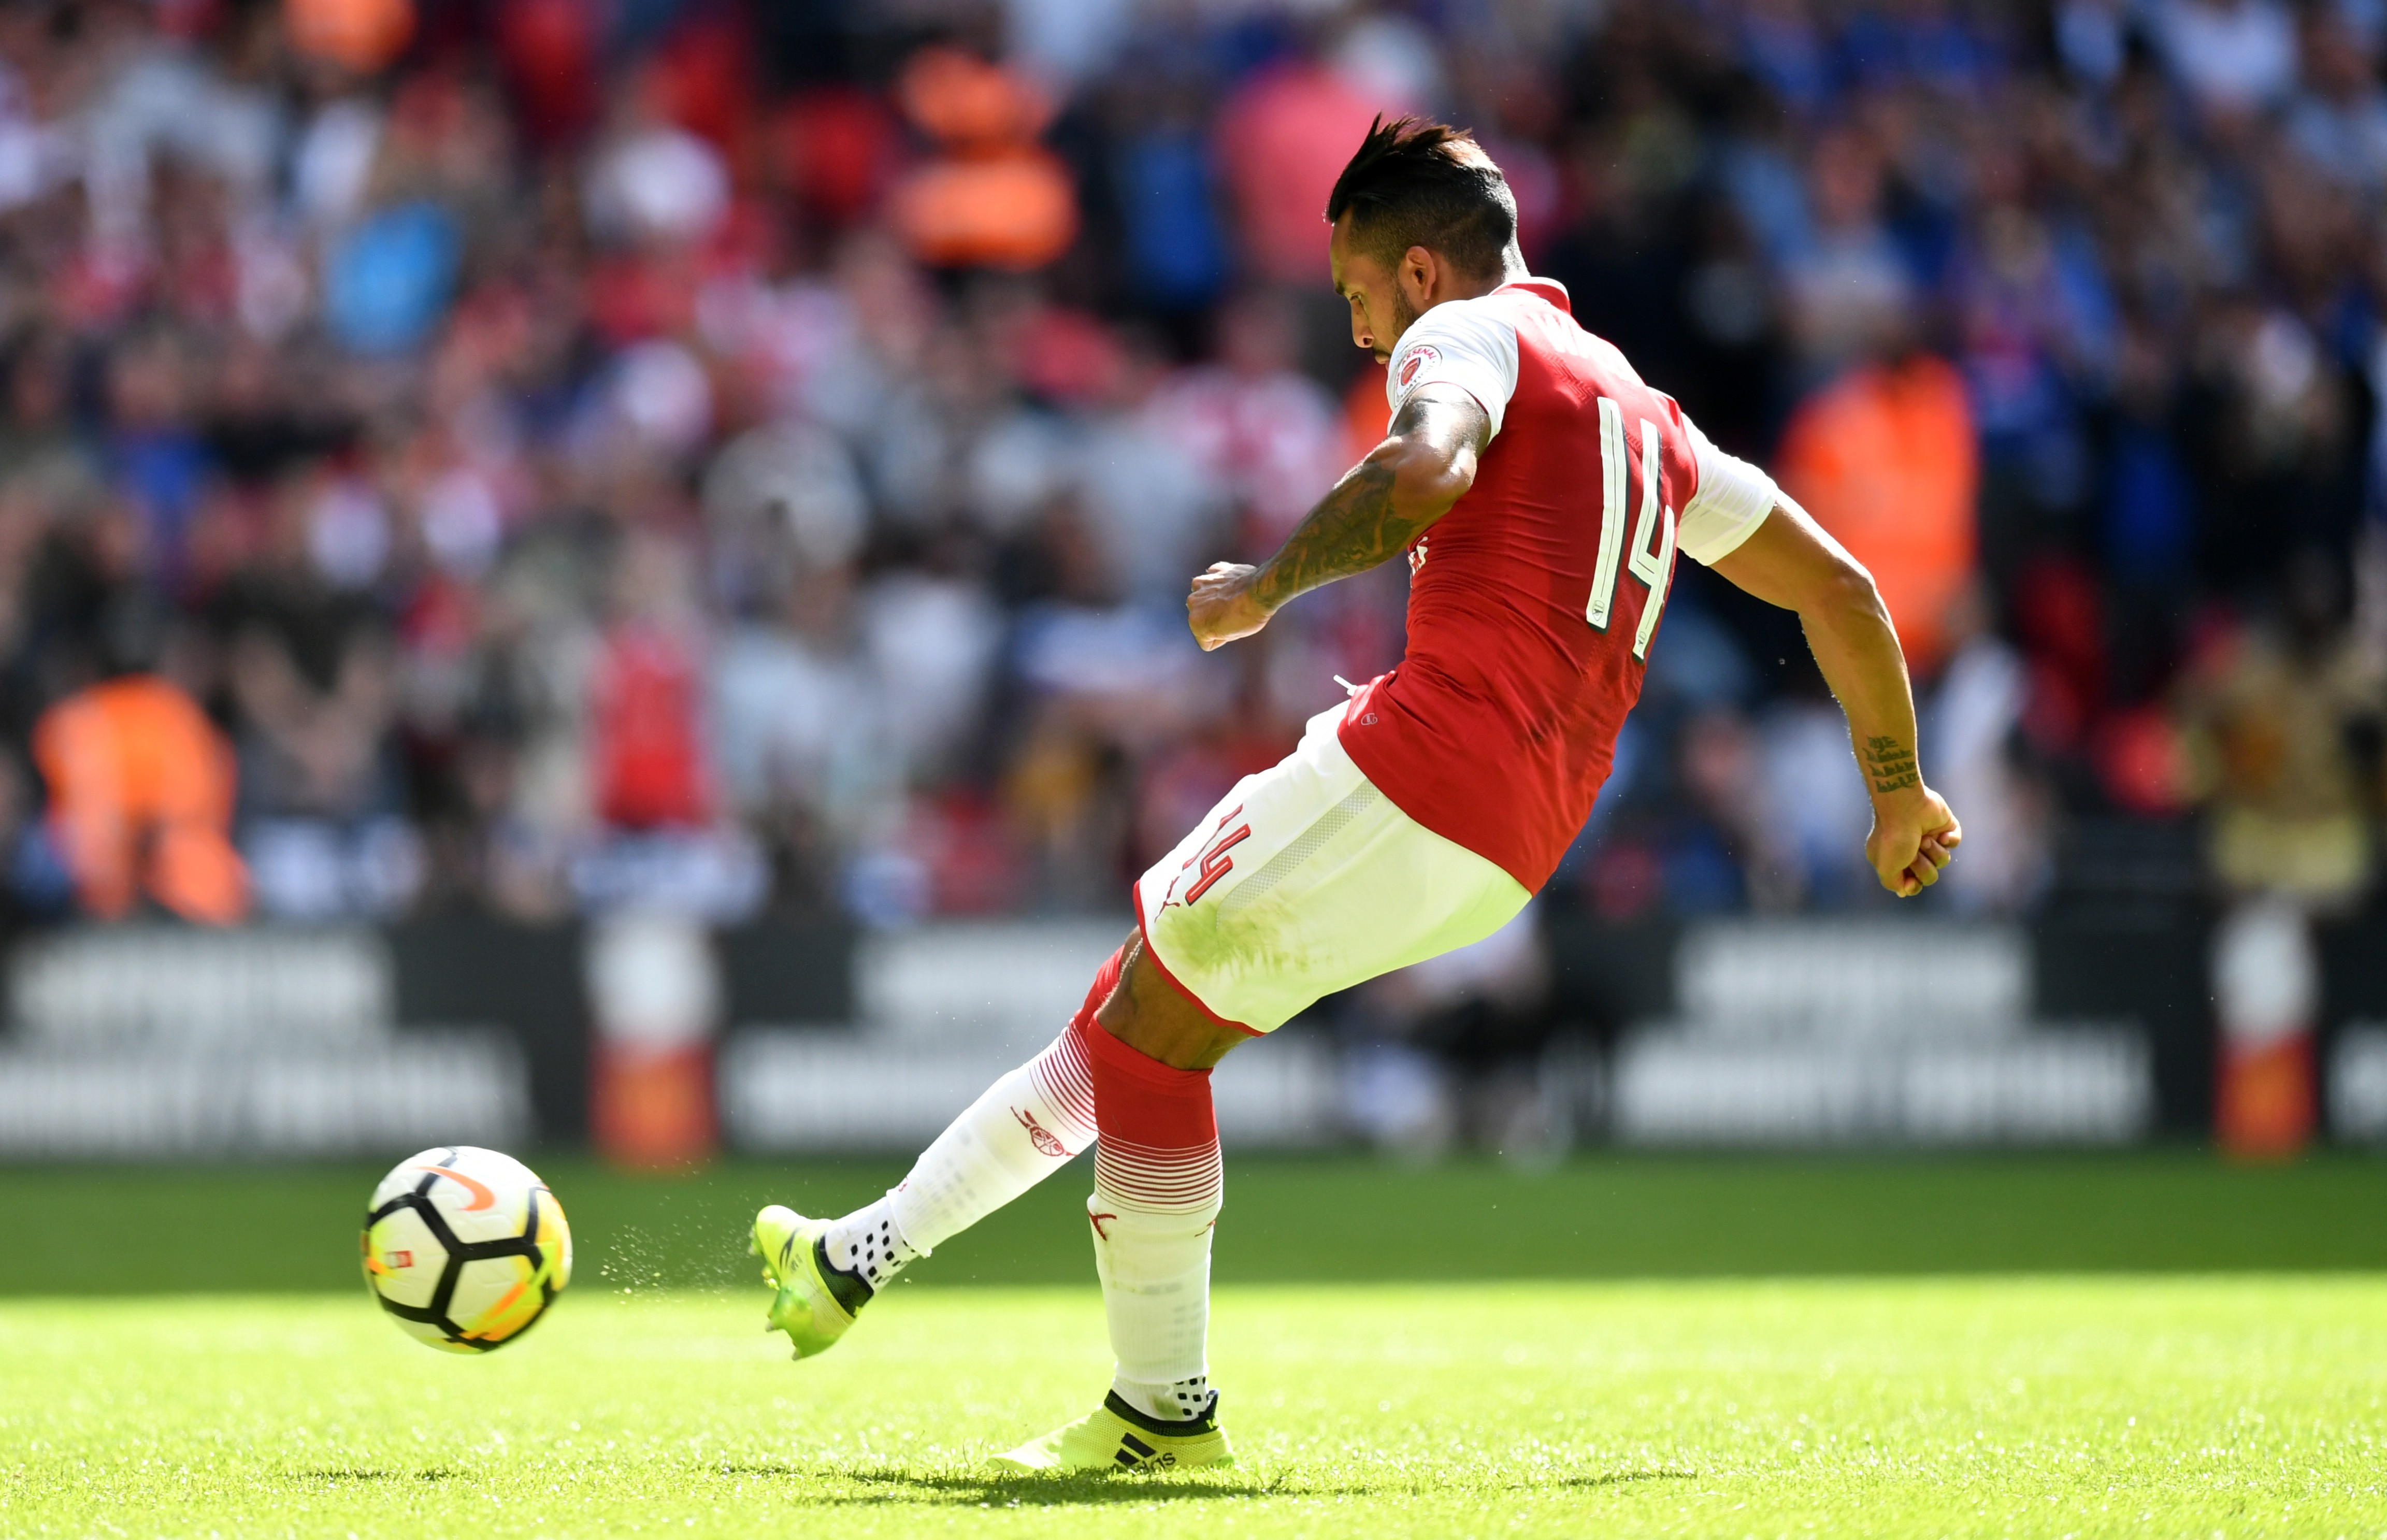 LONDON, ENGLAND - AUGUST 06: Theo Walcott of Arsenal scores his sides first penalty in the penalty shoot out during the The FA Community Shield final between Chelsea and Arsenal at Wembley Stadium on August 6, 2017 in London, England.  (Photo by Dan Mullan/Getty Images)